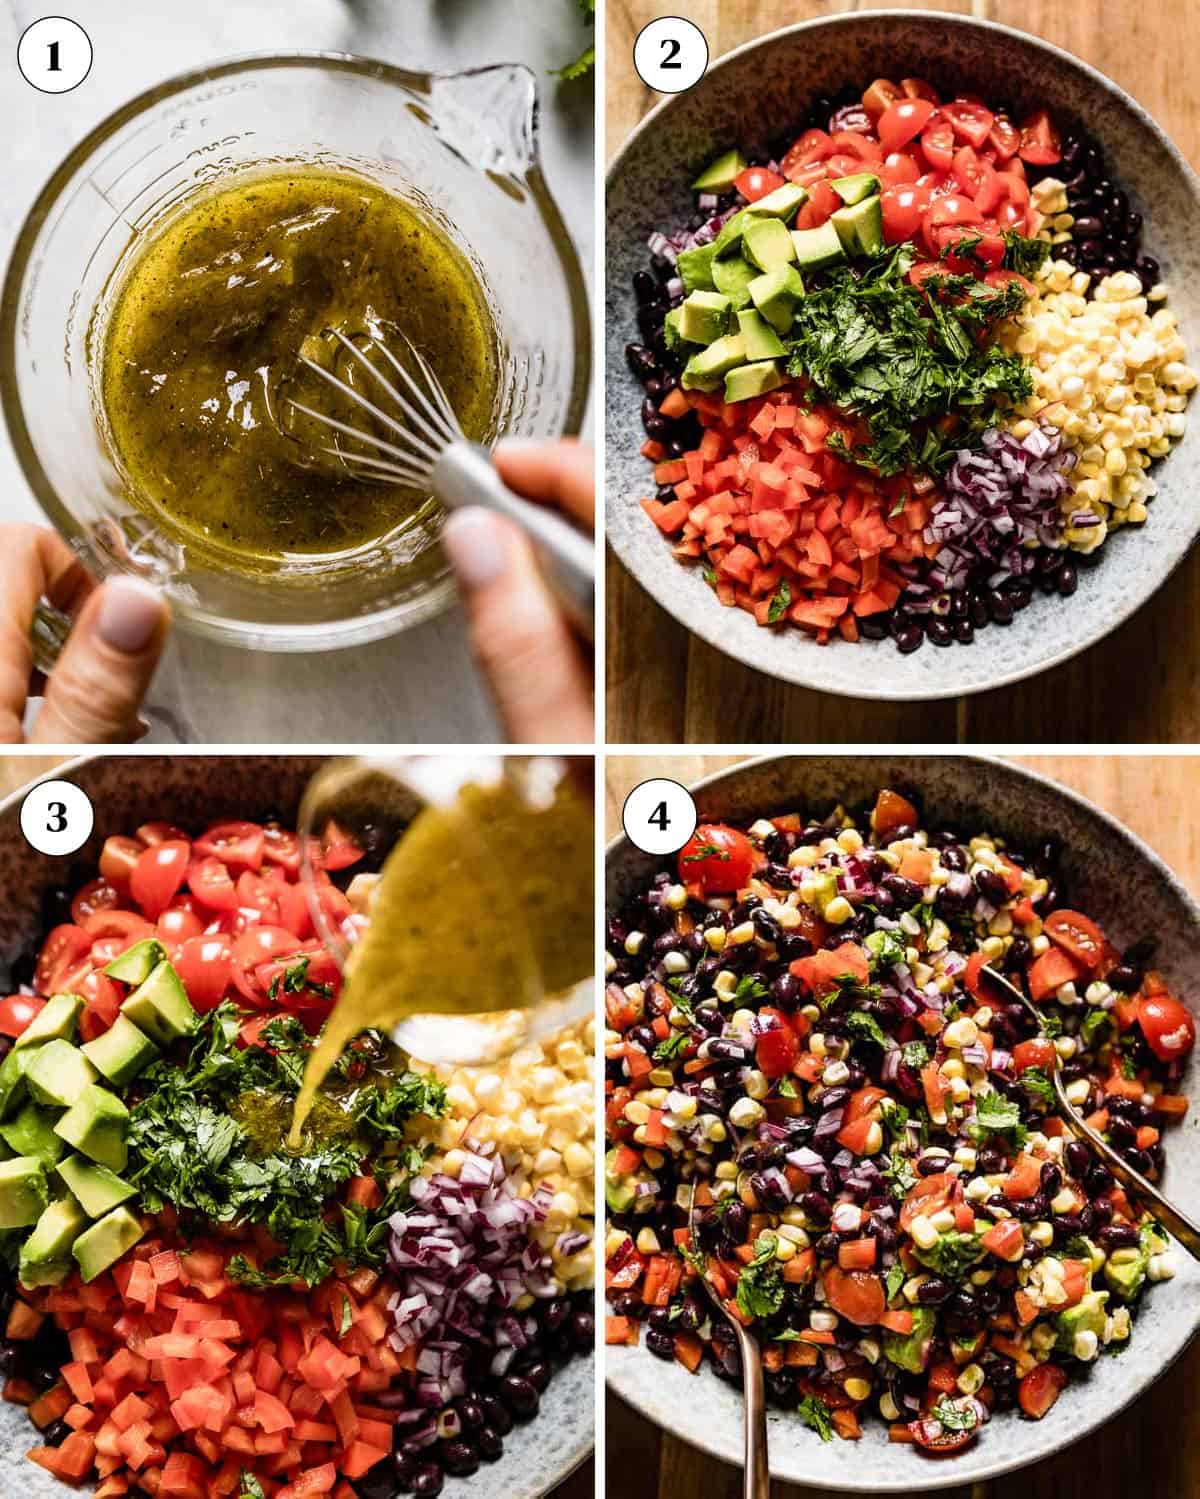 Steps showing how to make mexican corn and black bean salad.